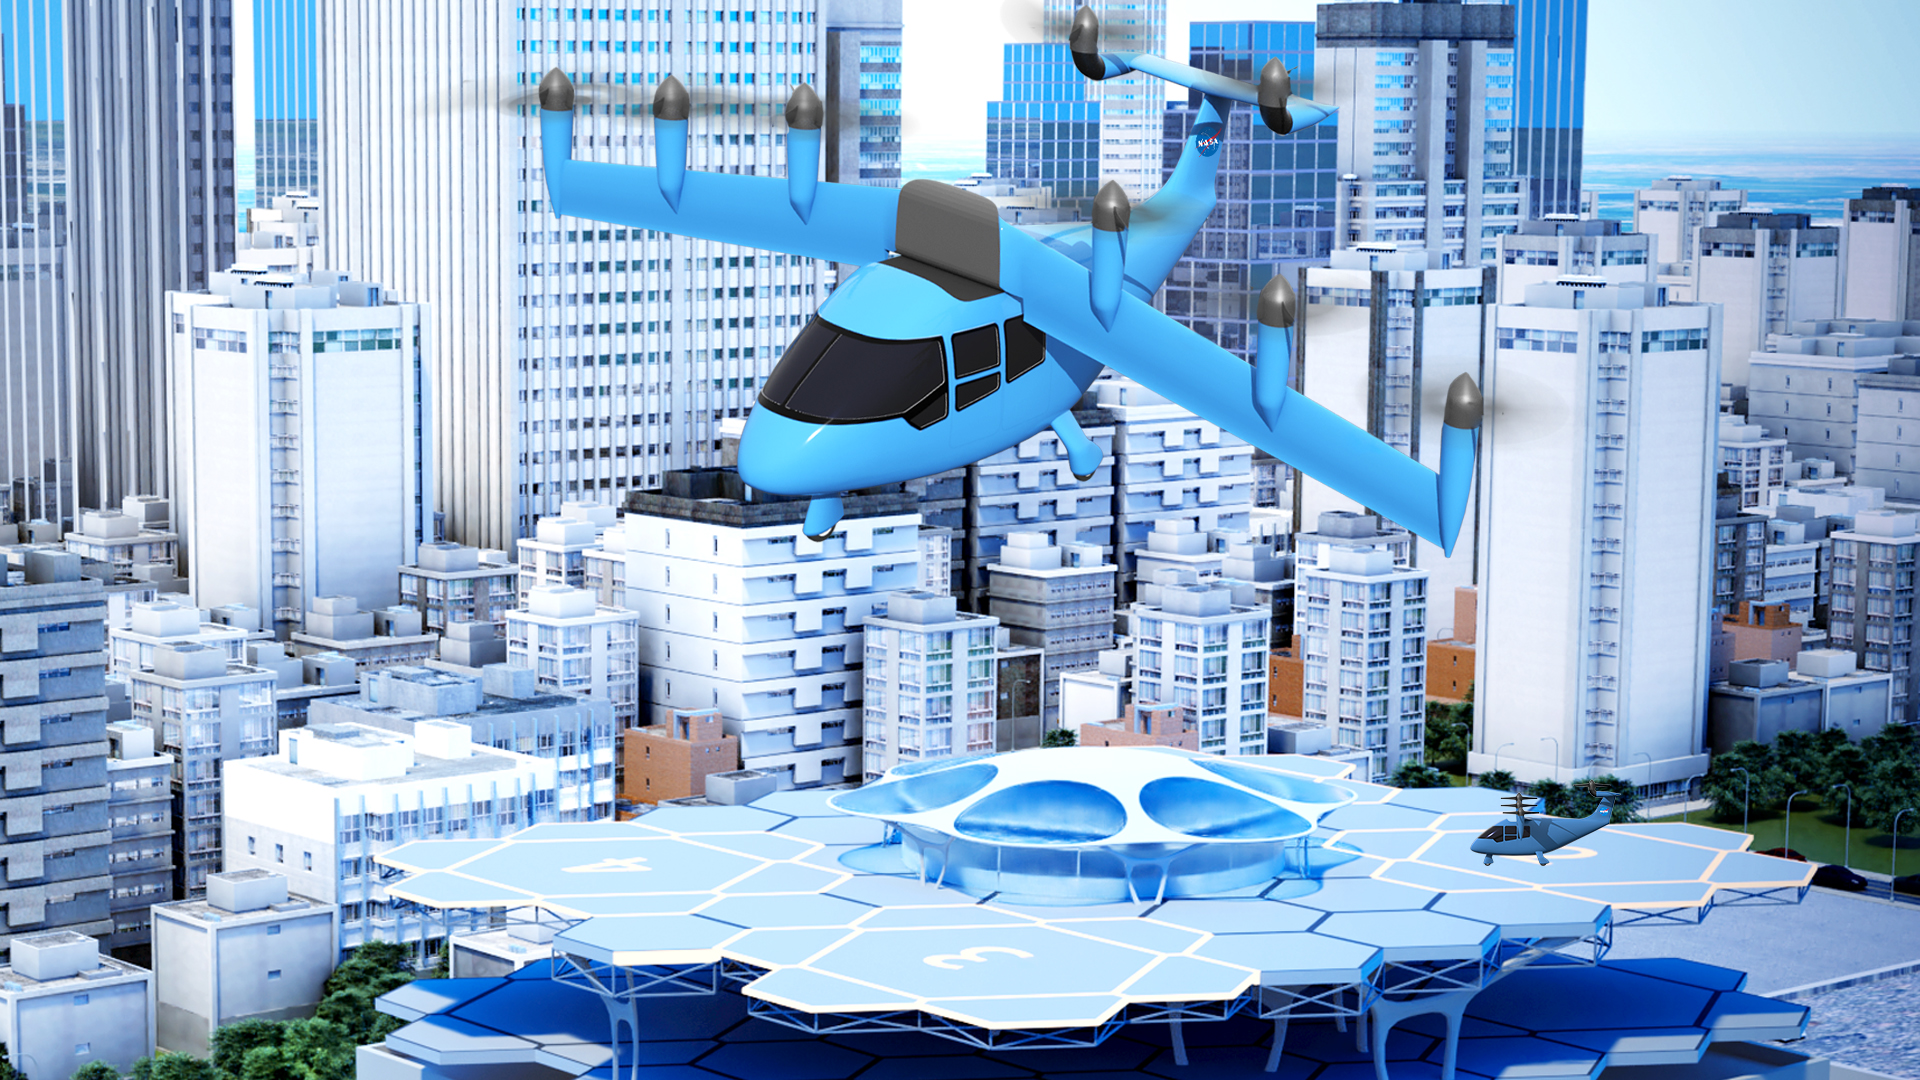 Artist concept of unmanned aircraft in a city leaving a vertiport.